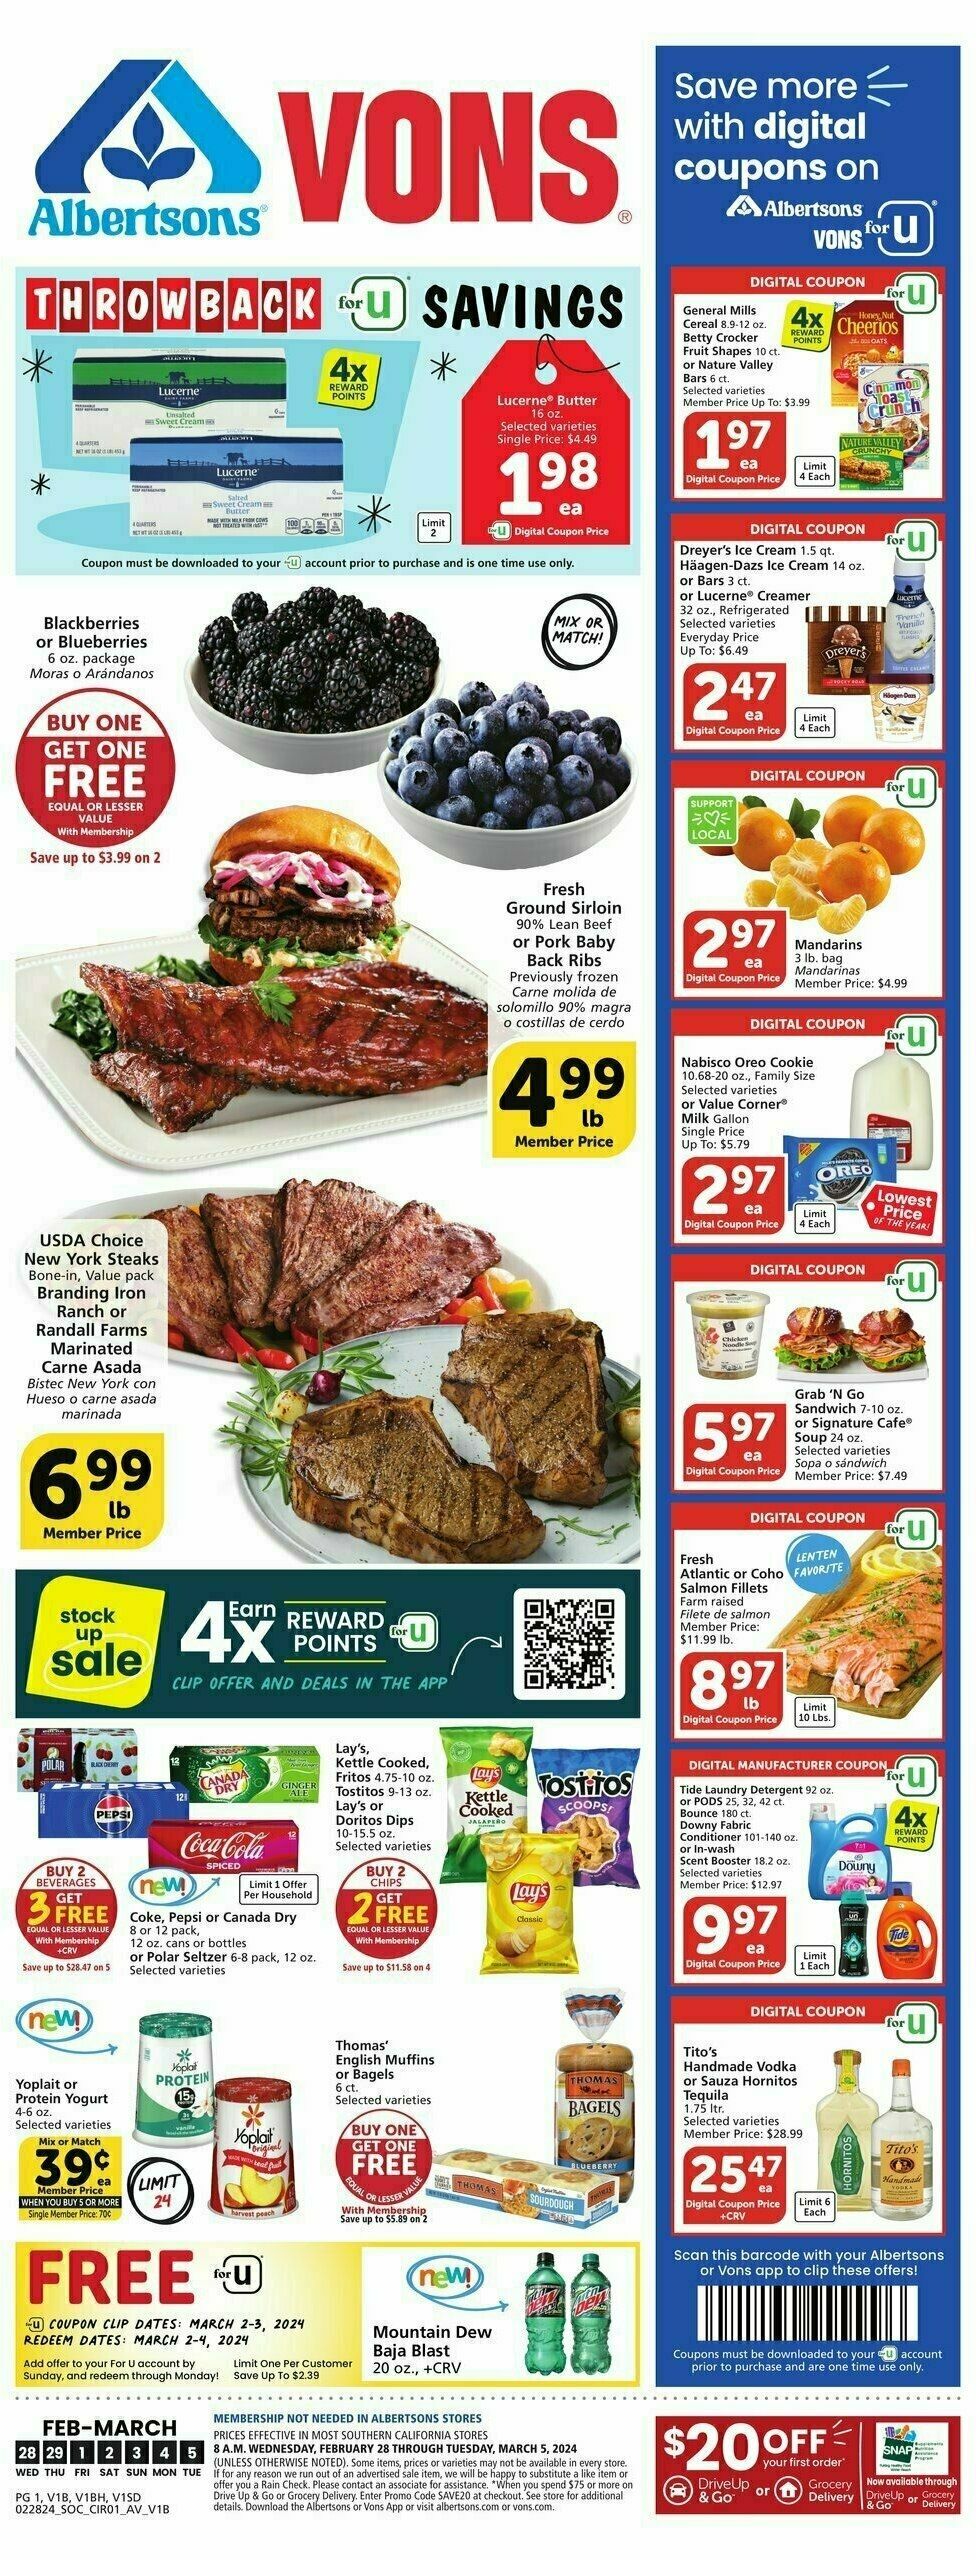 Vons Weekly Ad from February 28